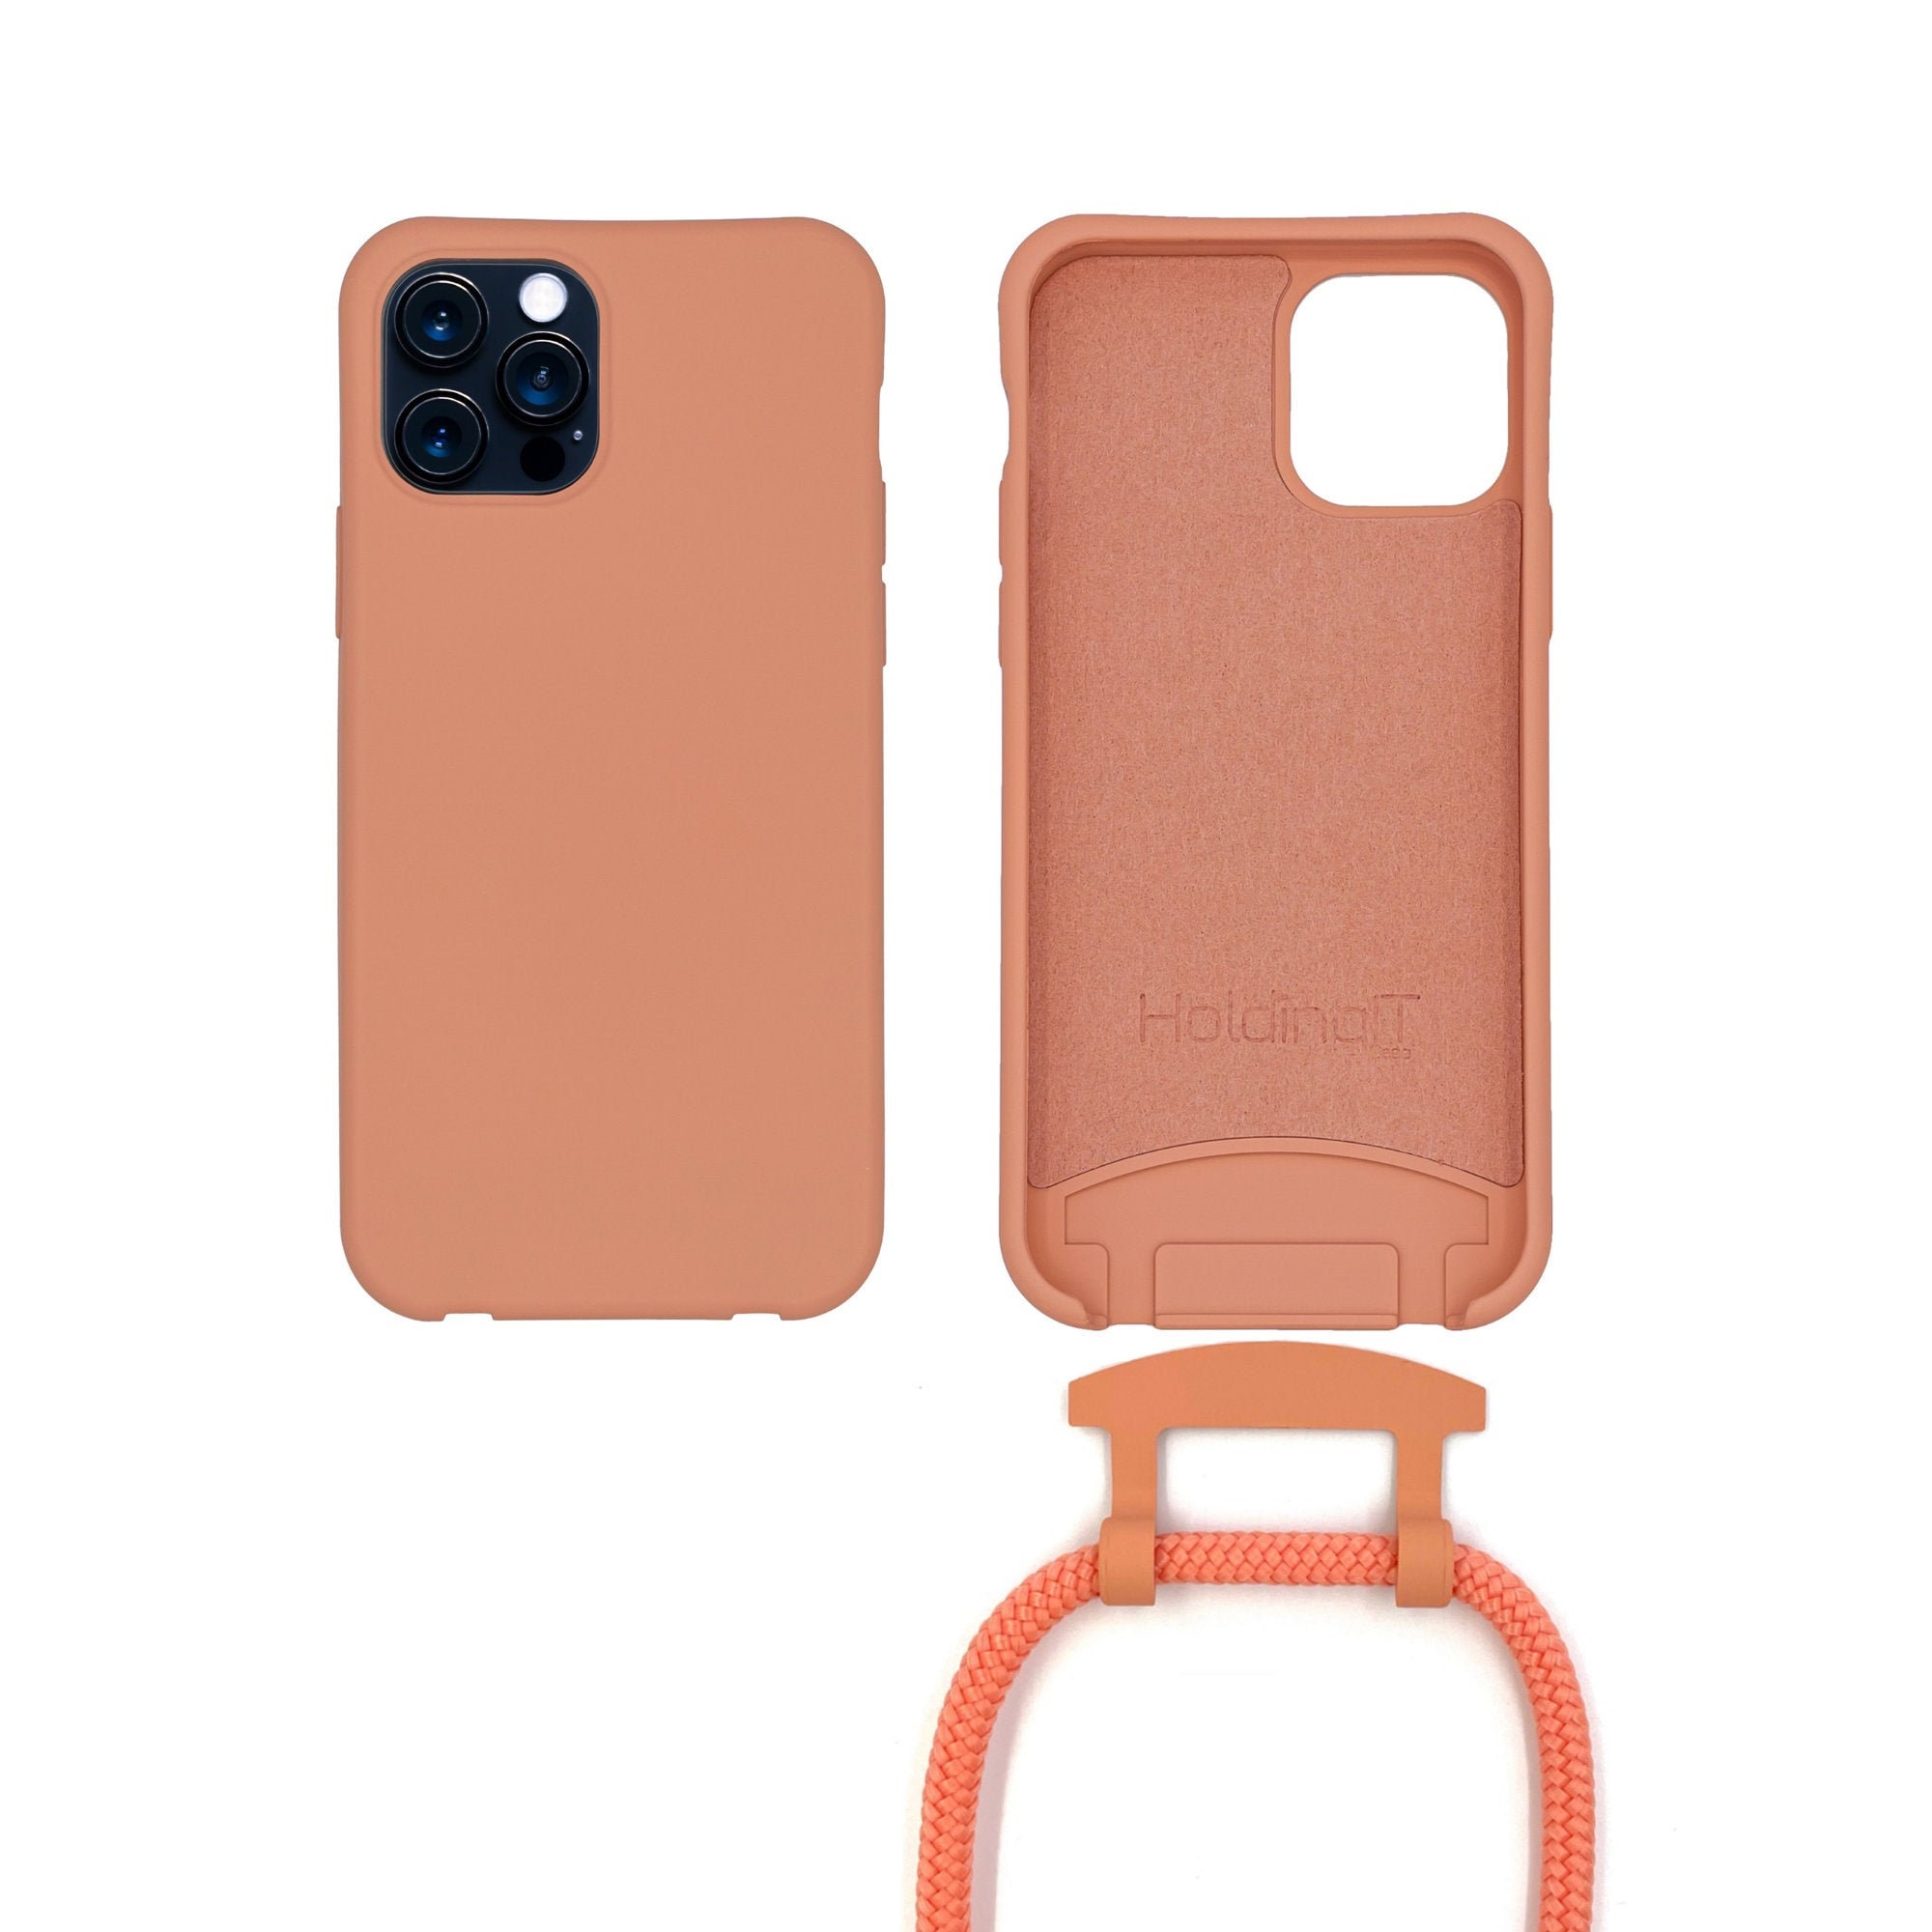 2-in-1 Hands Free iPhone Cover with Drop Protection HoldingIT Crossbody Phone Case with Detachable Lanyard Compatible with iPhone 11 11 Pro Max 11 Pro Adjustable Rope 